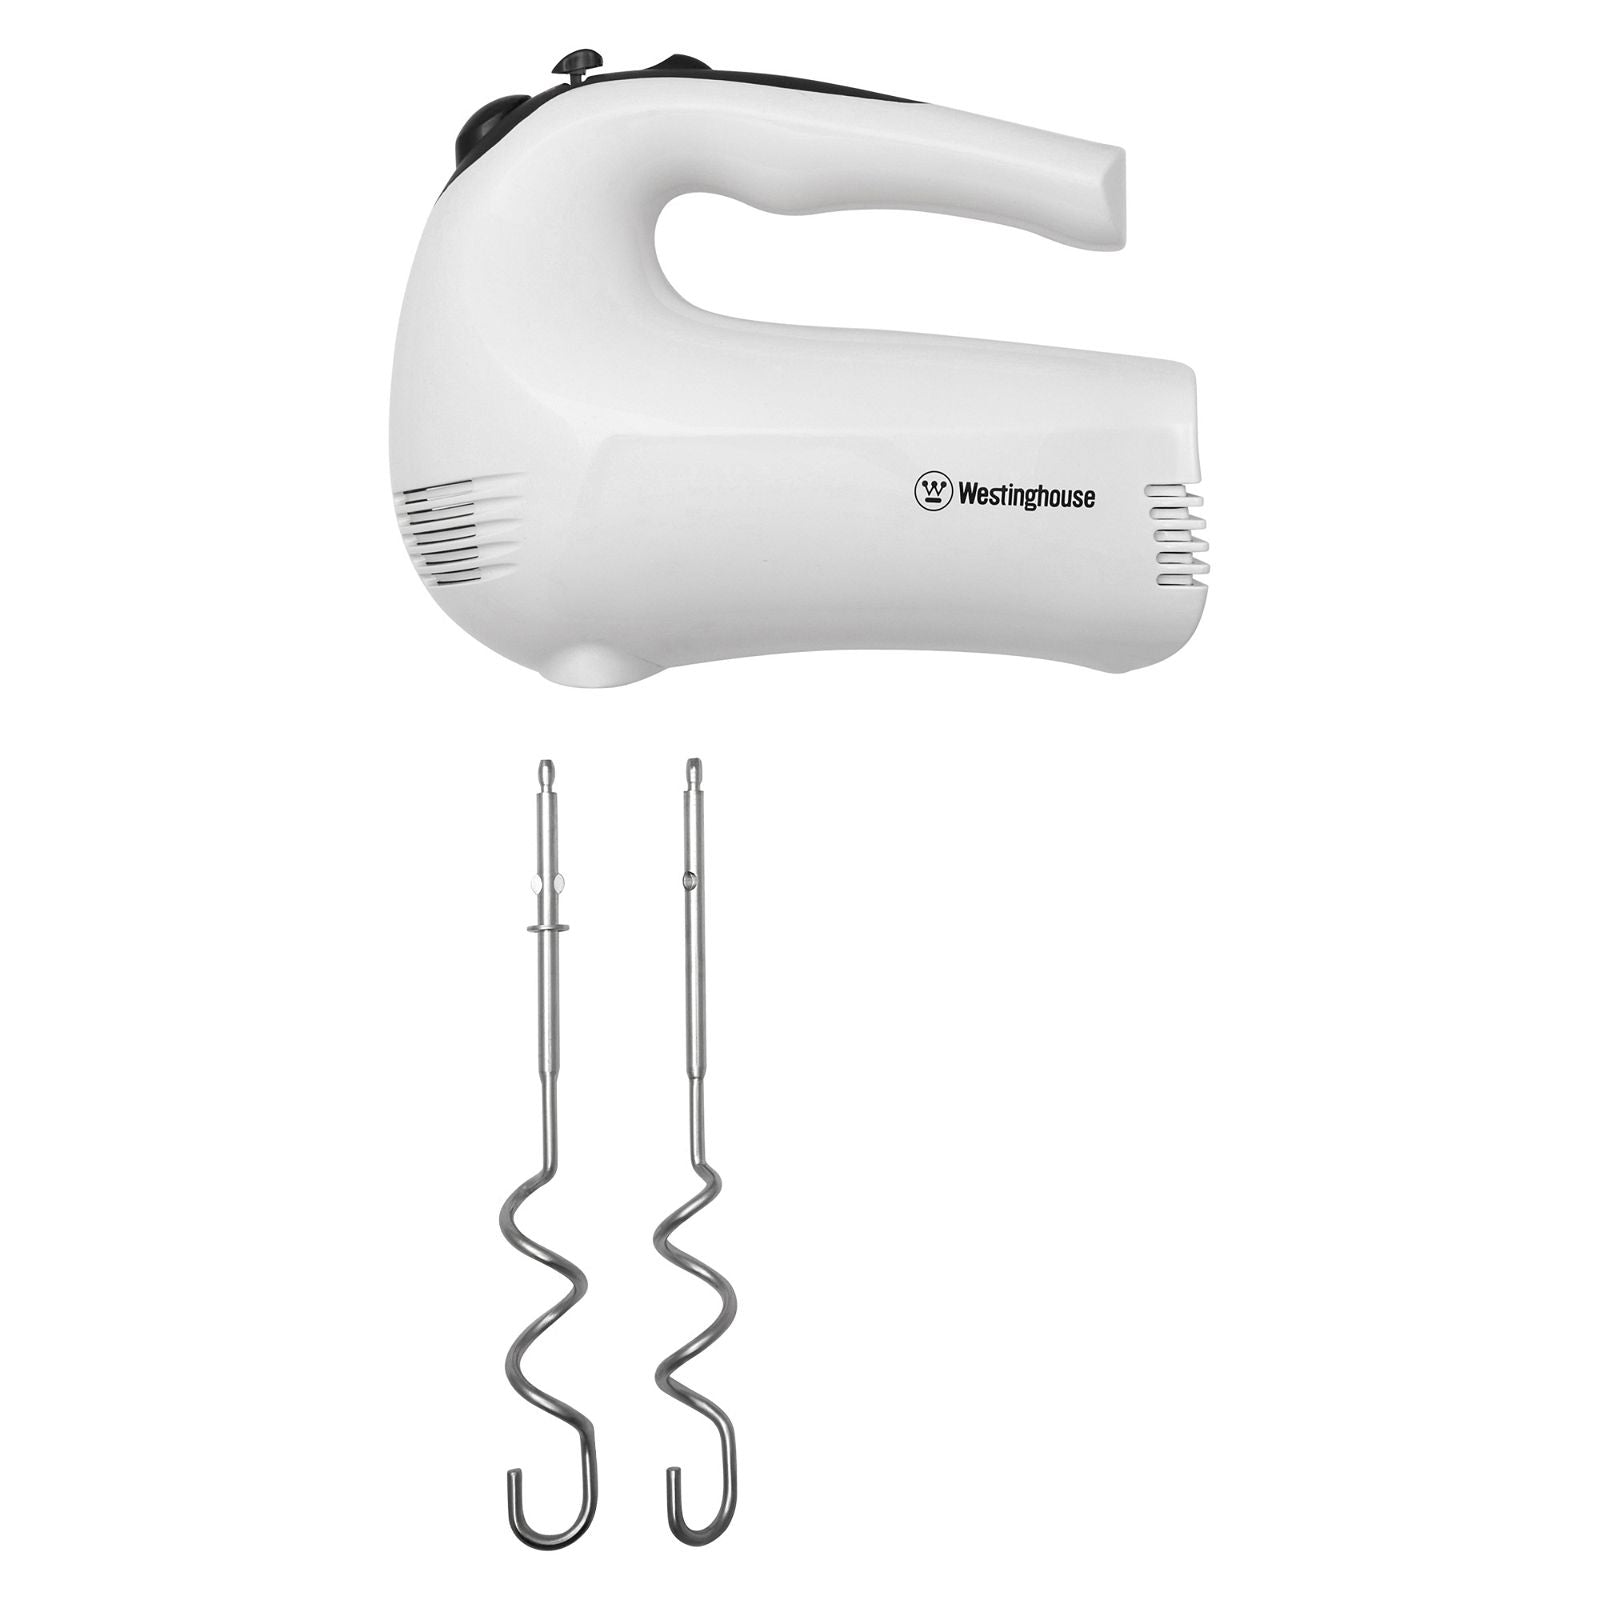 Westinghouse Hand Mixer 300W 5 Speed-#product_category#- Distributed by:  under license